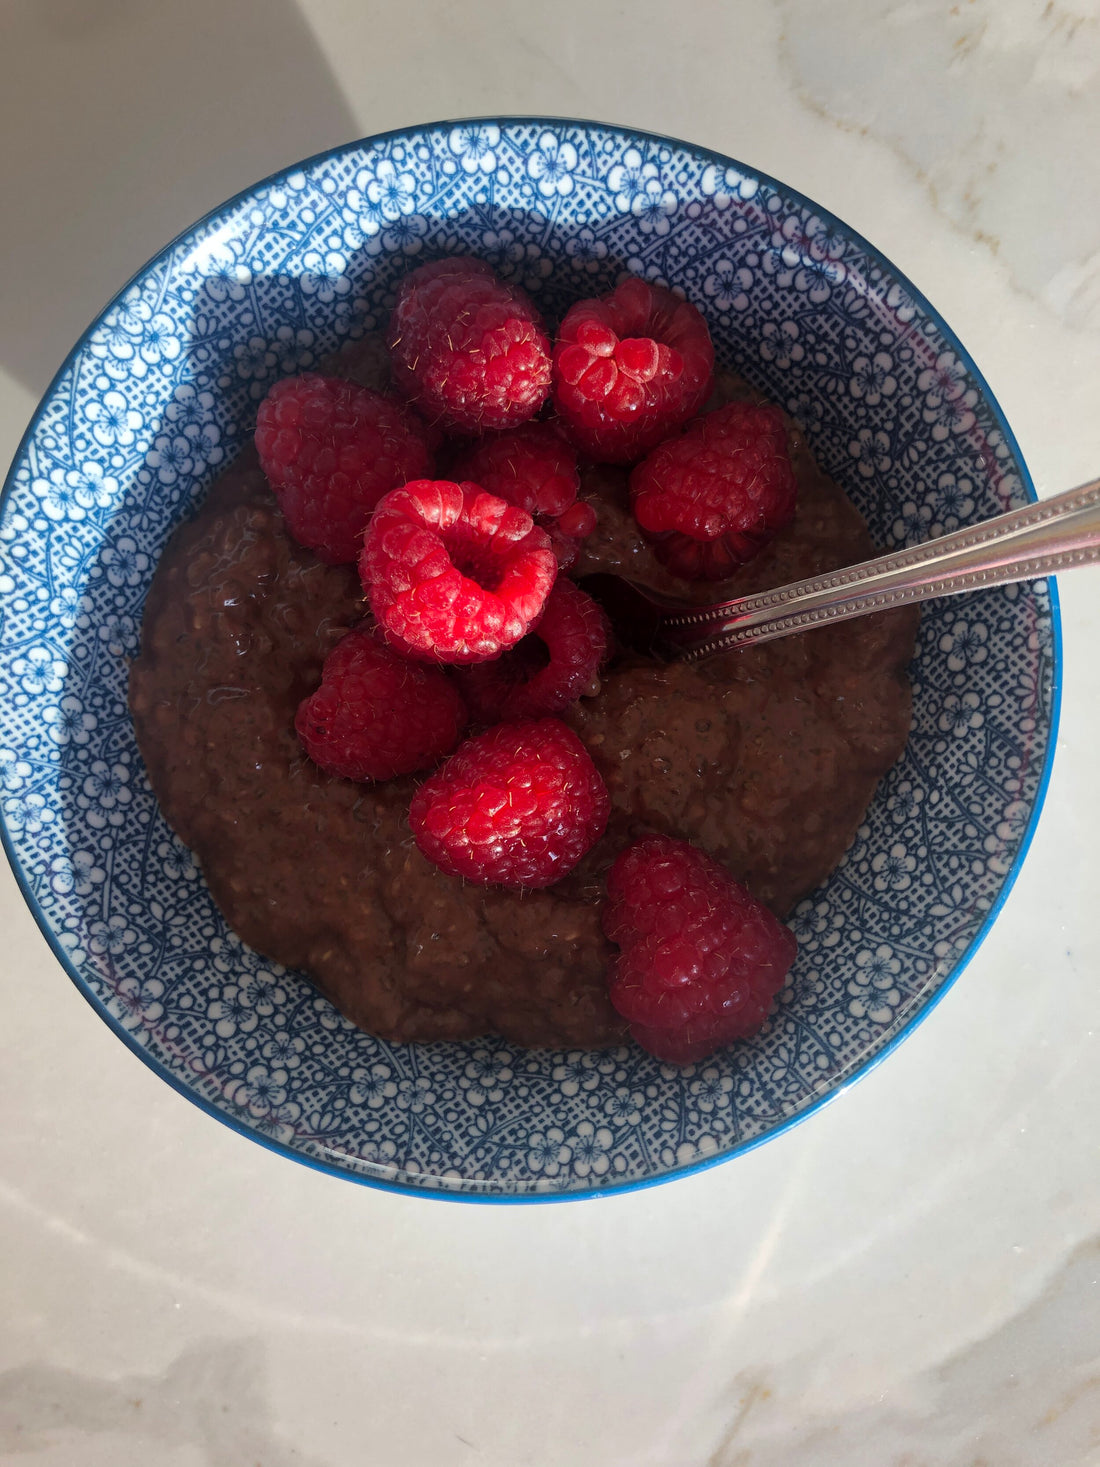 Looking For Healthy Desserts: Chocolate Chia Seed Pudding W/ Organic Raspberries